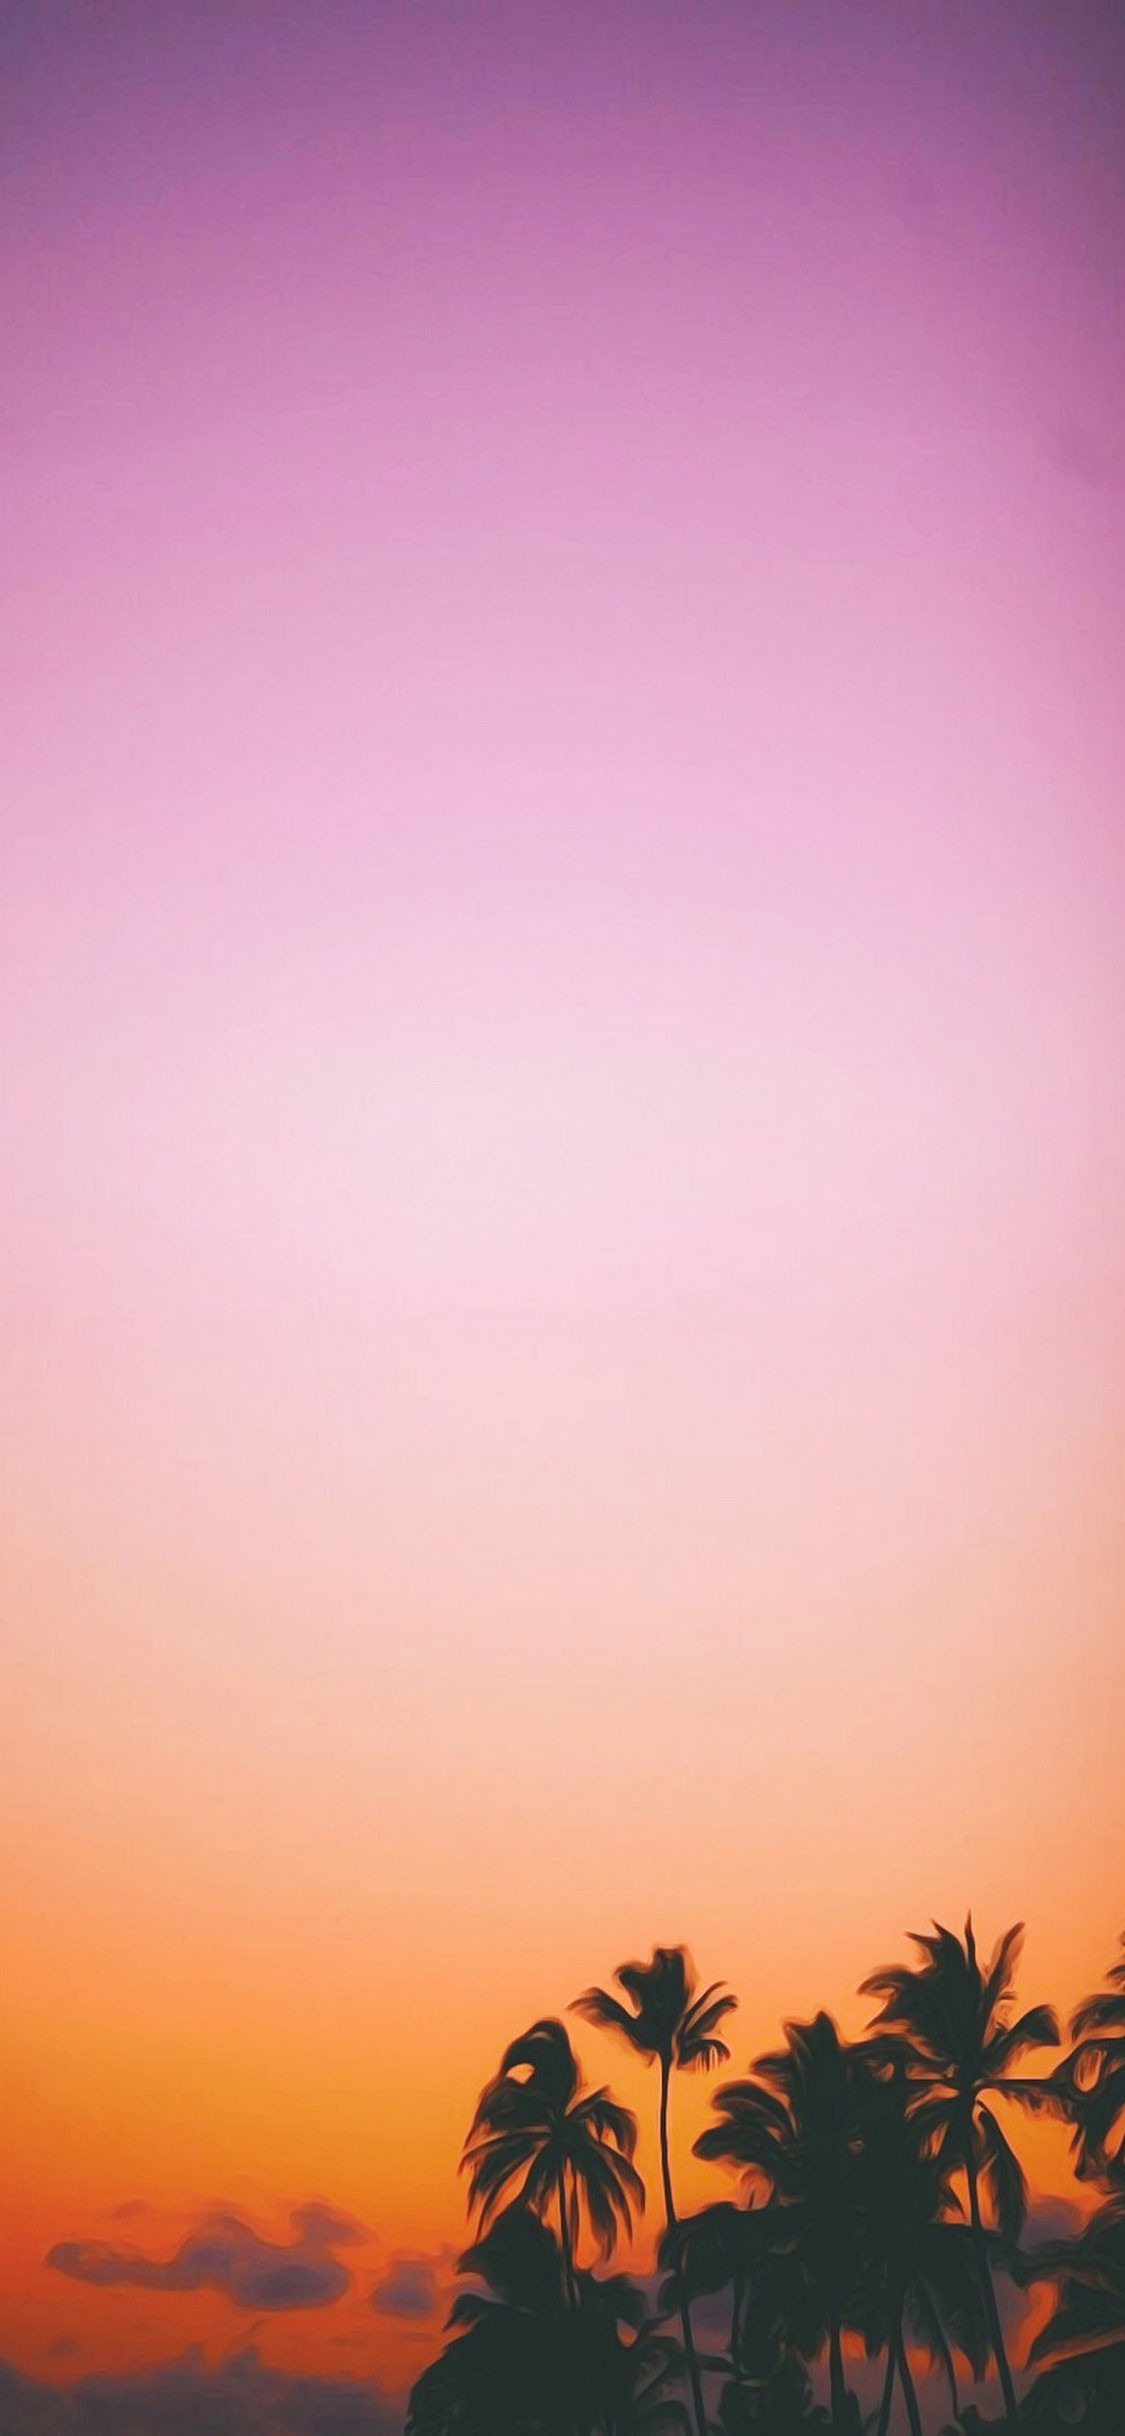 Most Popular iPhone Wallpaper (74+ images)